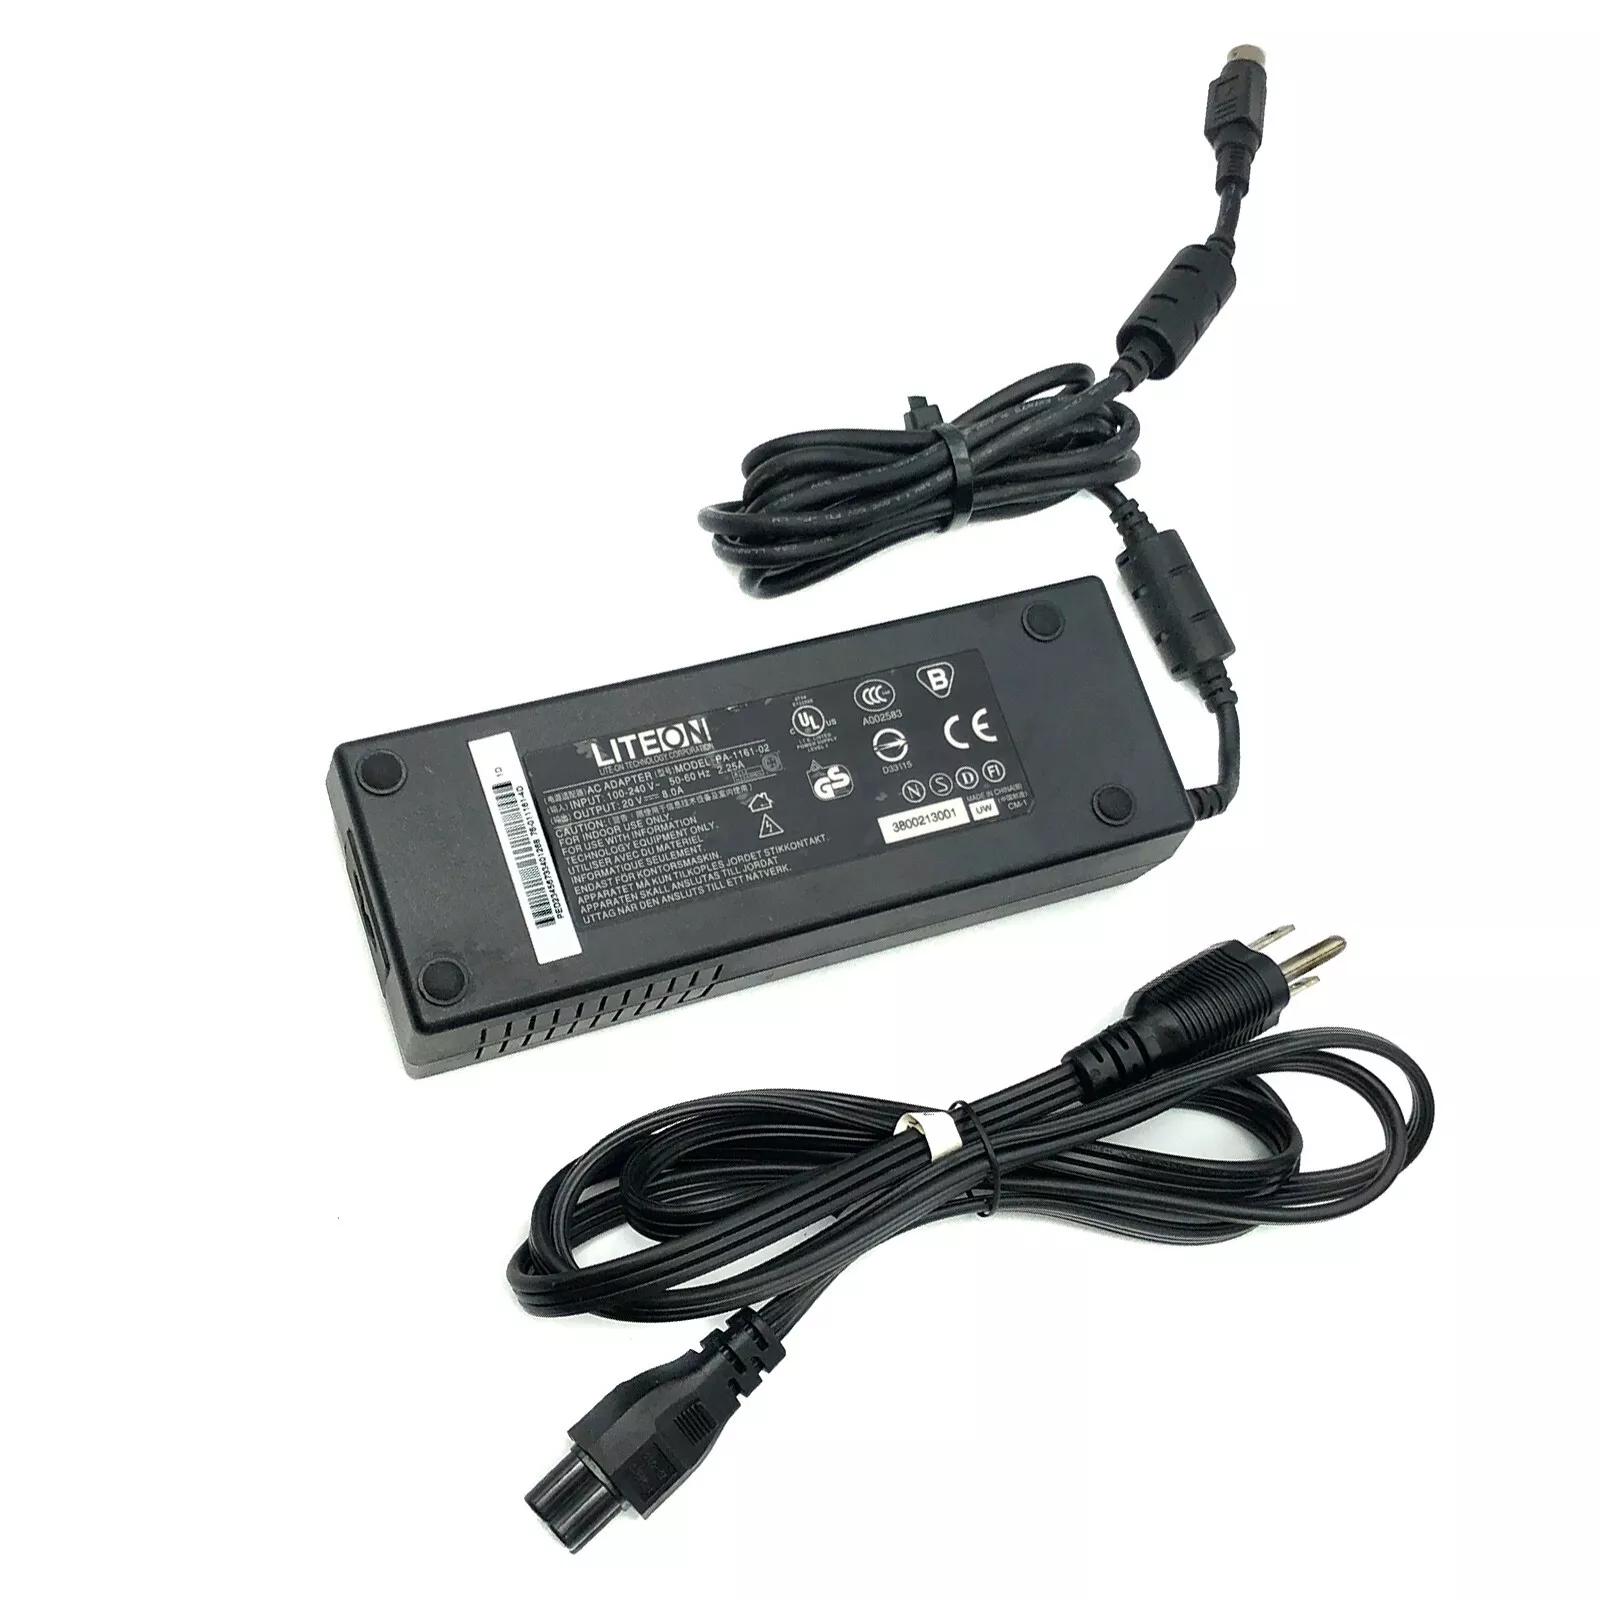 *Brand NEW*Genuine LiteOn 4-PIN 160W 20V 8A AC/DC Adapter PA-1161-02 Power Supply